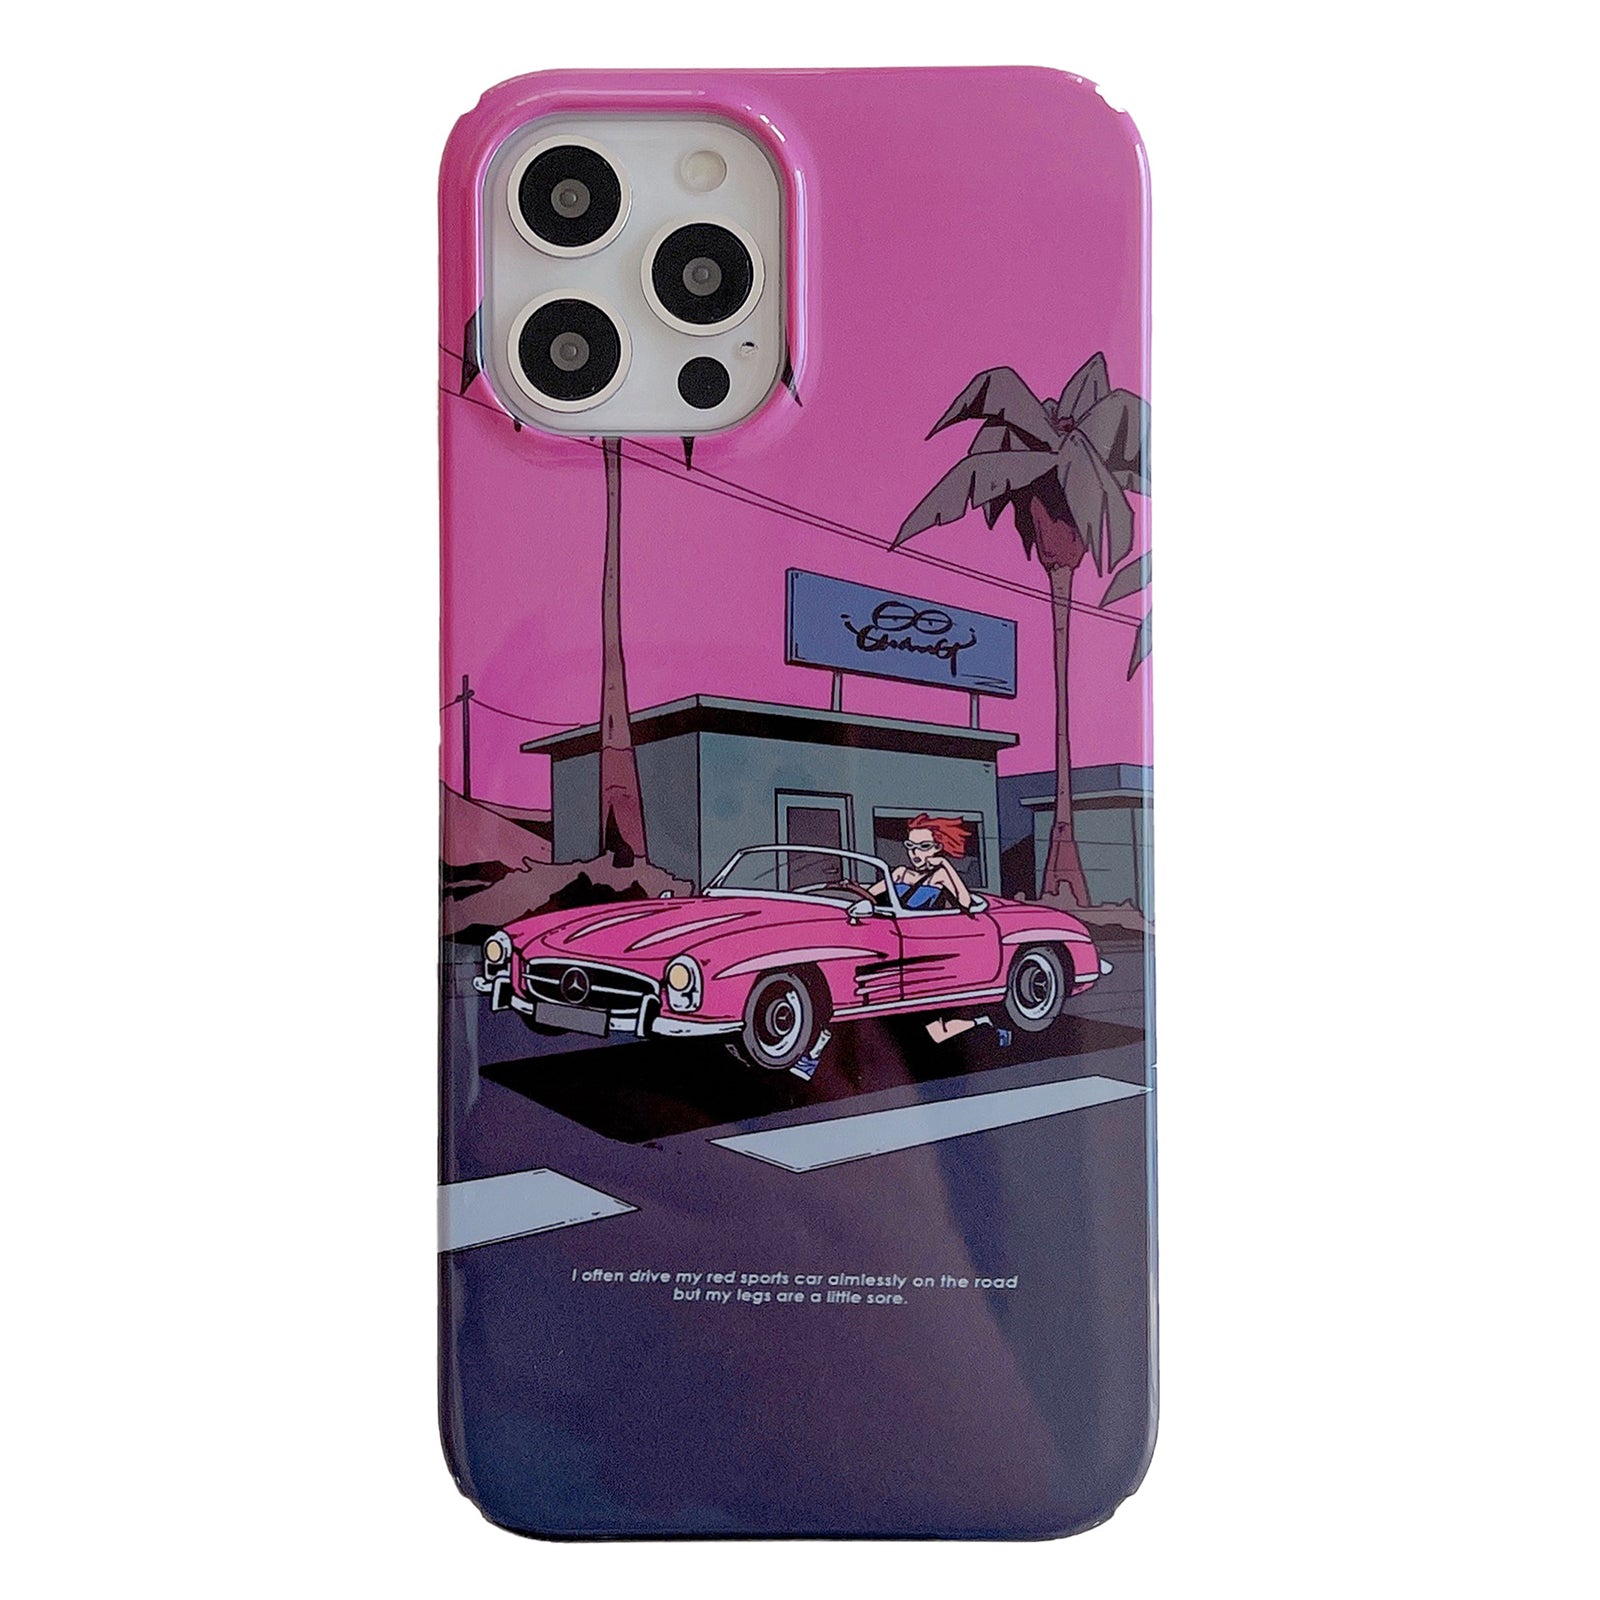 Uniqkart for iPhone 12 Pro Max 6.7 inch Hard PC Phone Case Pattern Printing Protective Glossy Phone Shell - Cool Girl